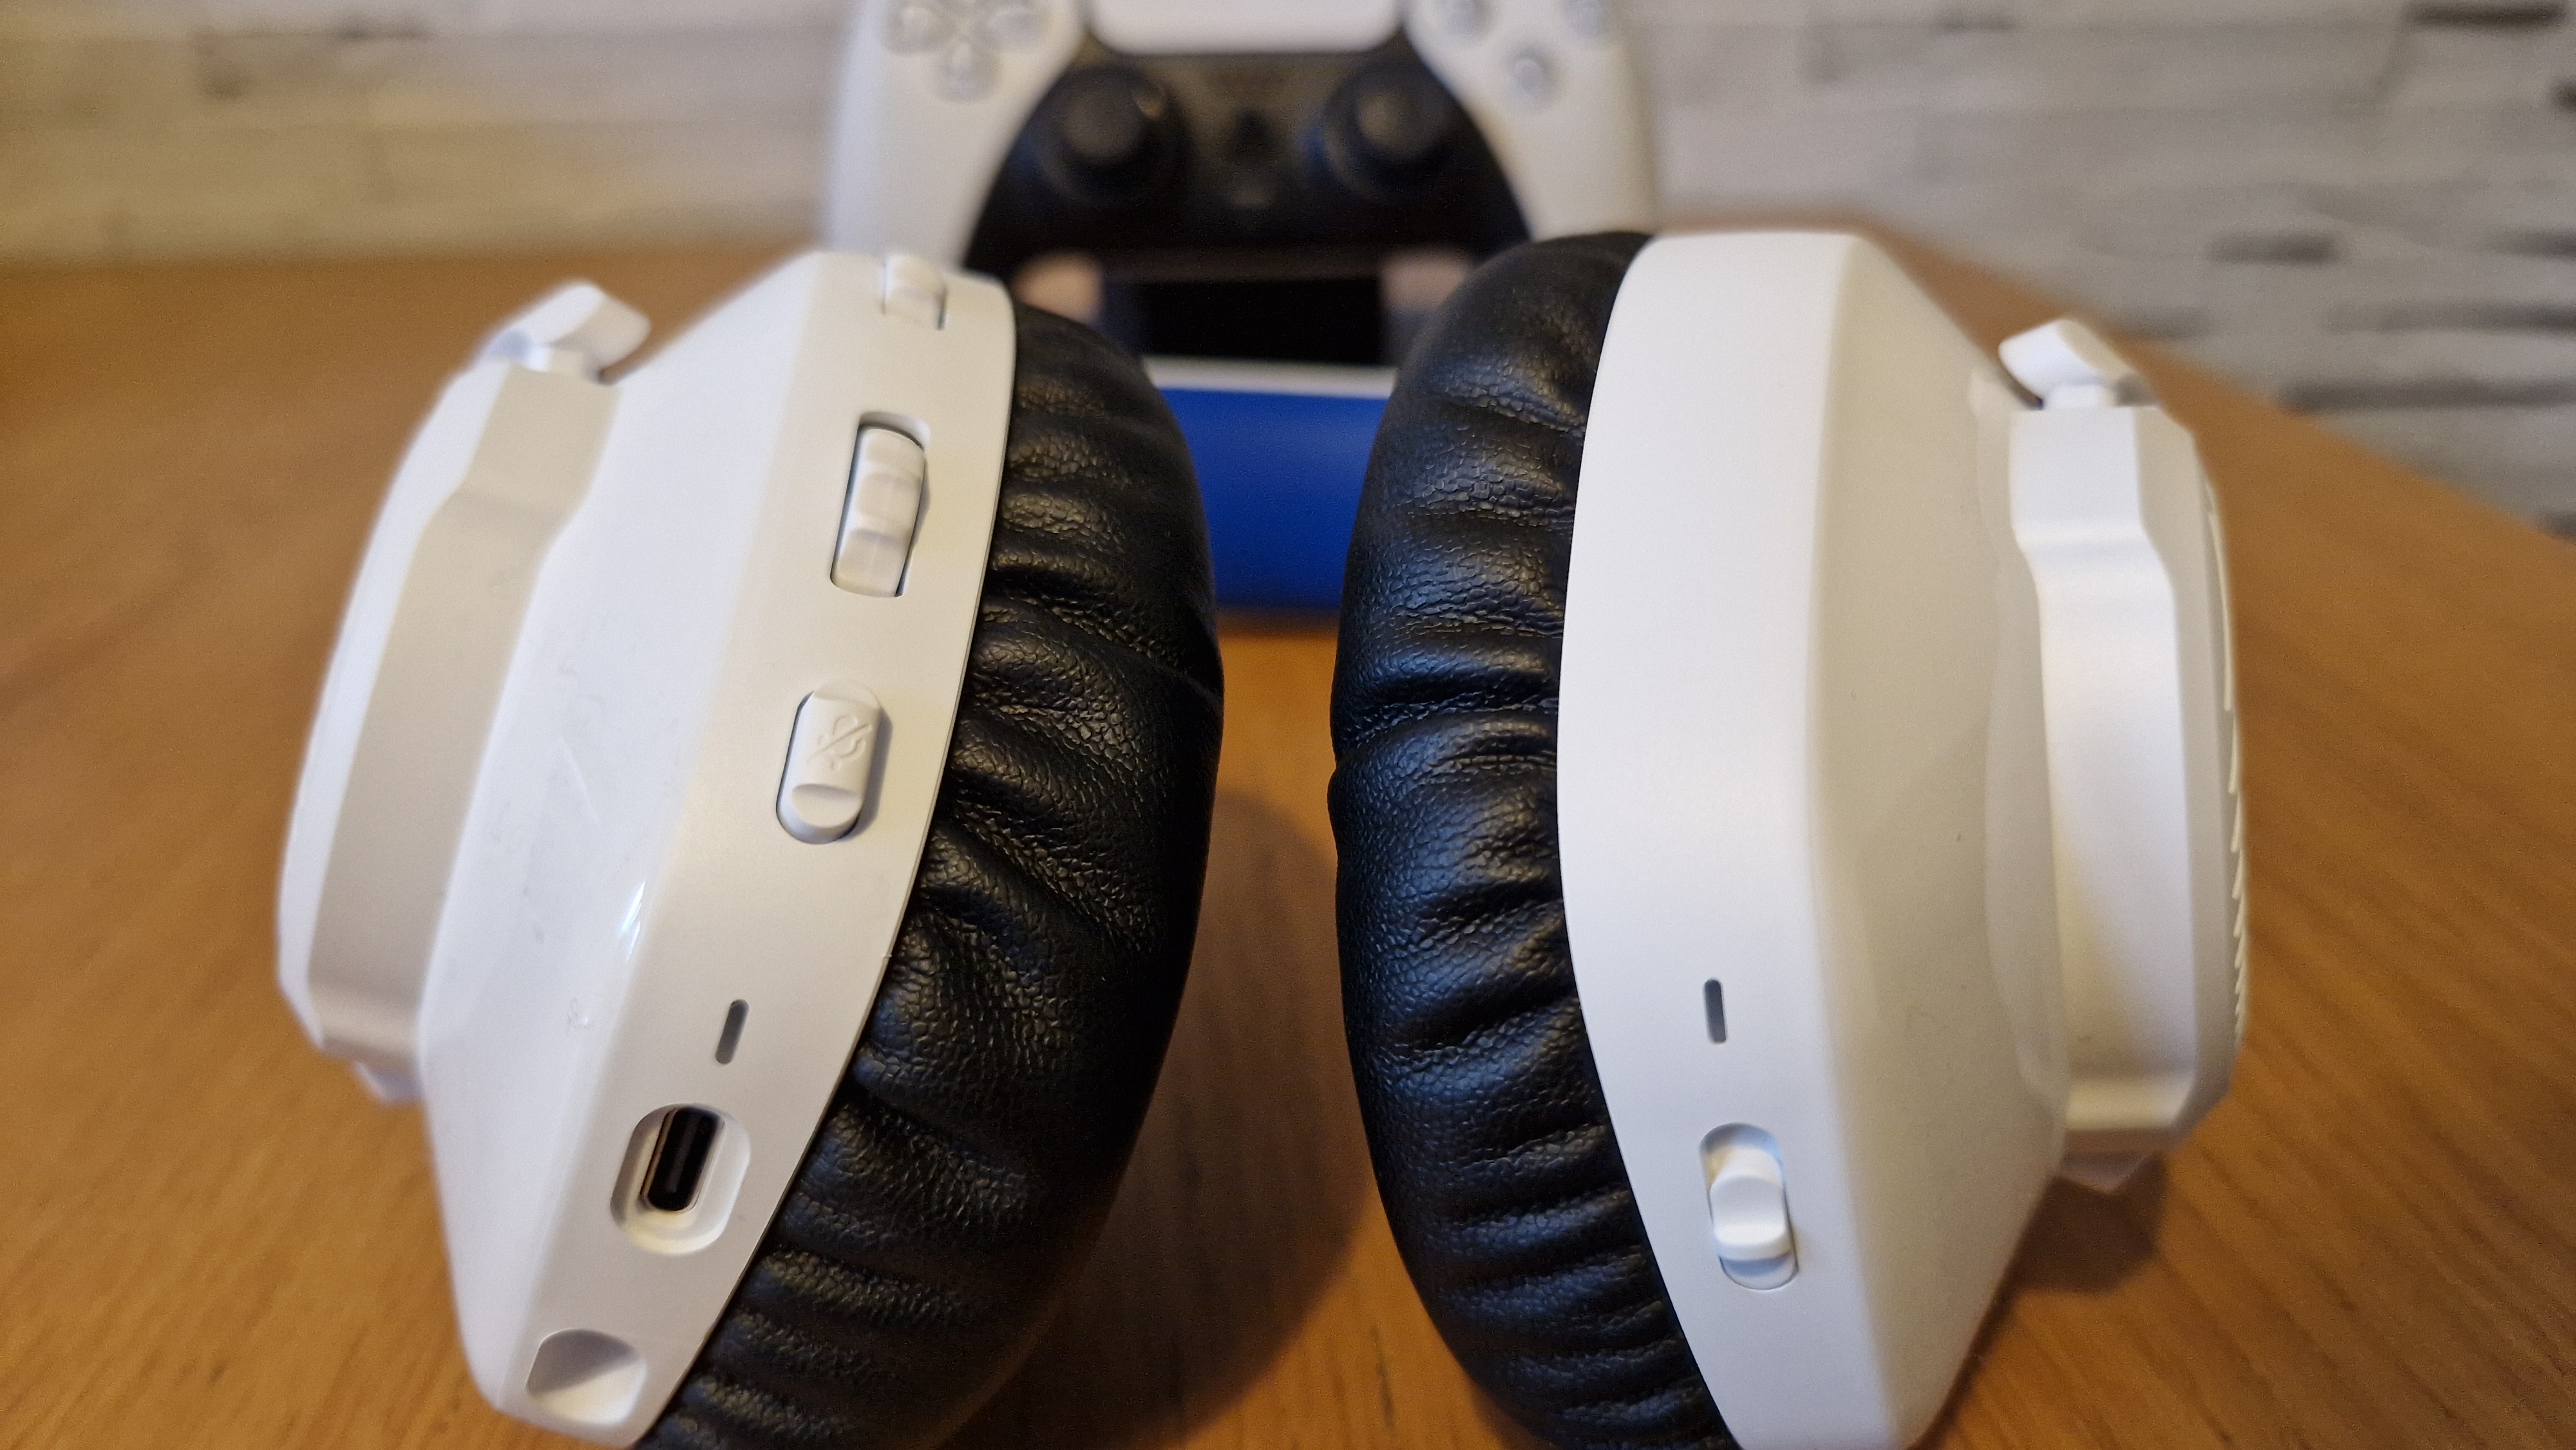 Profile and detail shots of the JBL Quantum 360P wireless gaming headset